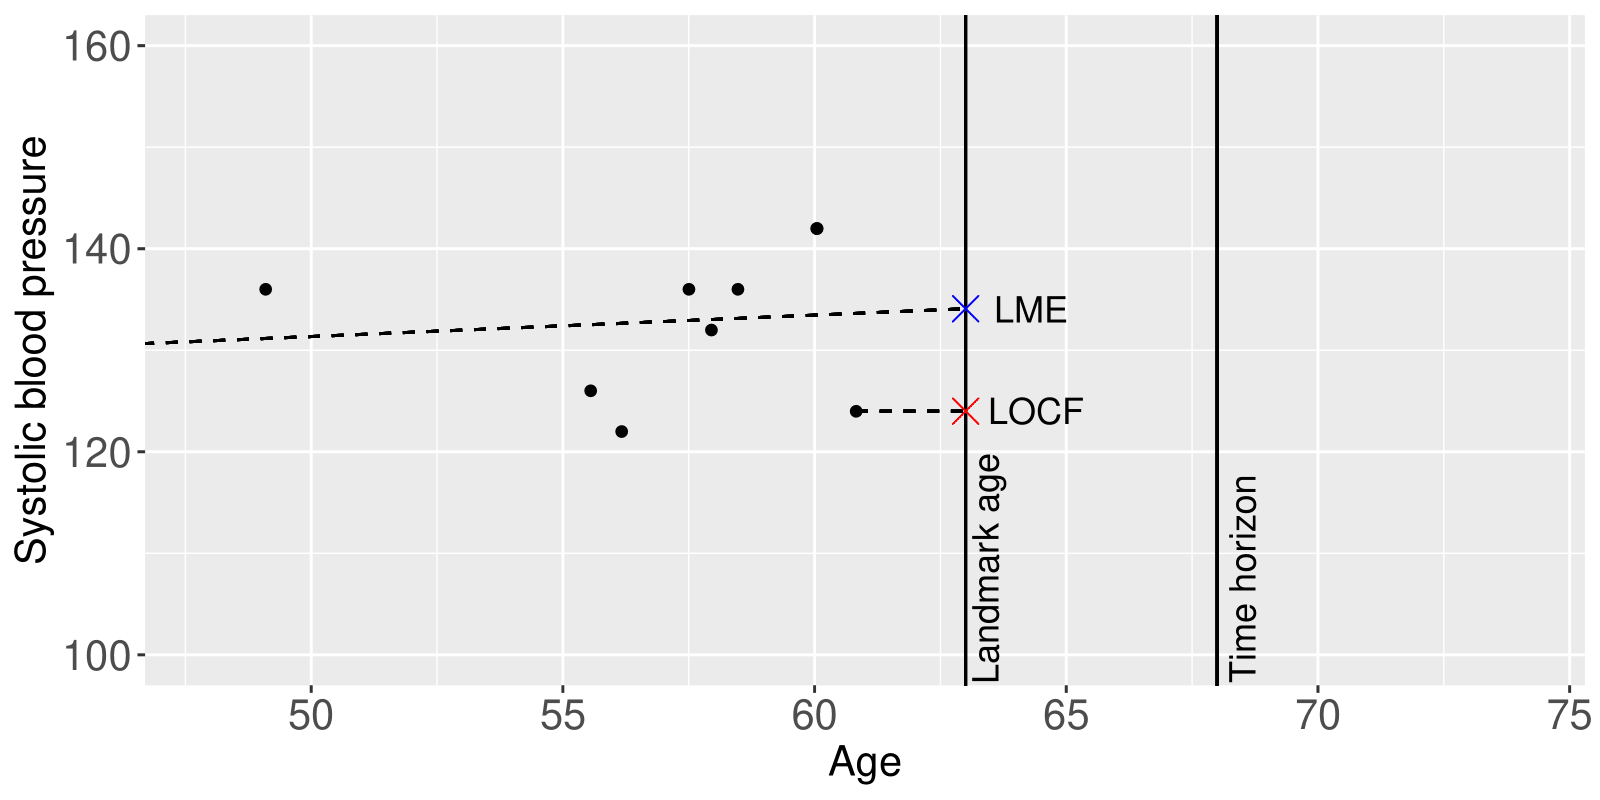 Plot showing systolic blood pressure vs. age at a landmark age with repeated measures